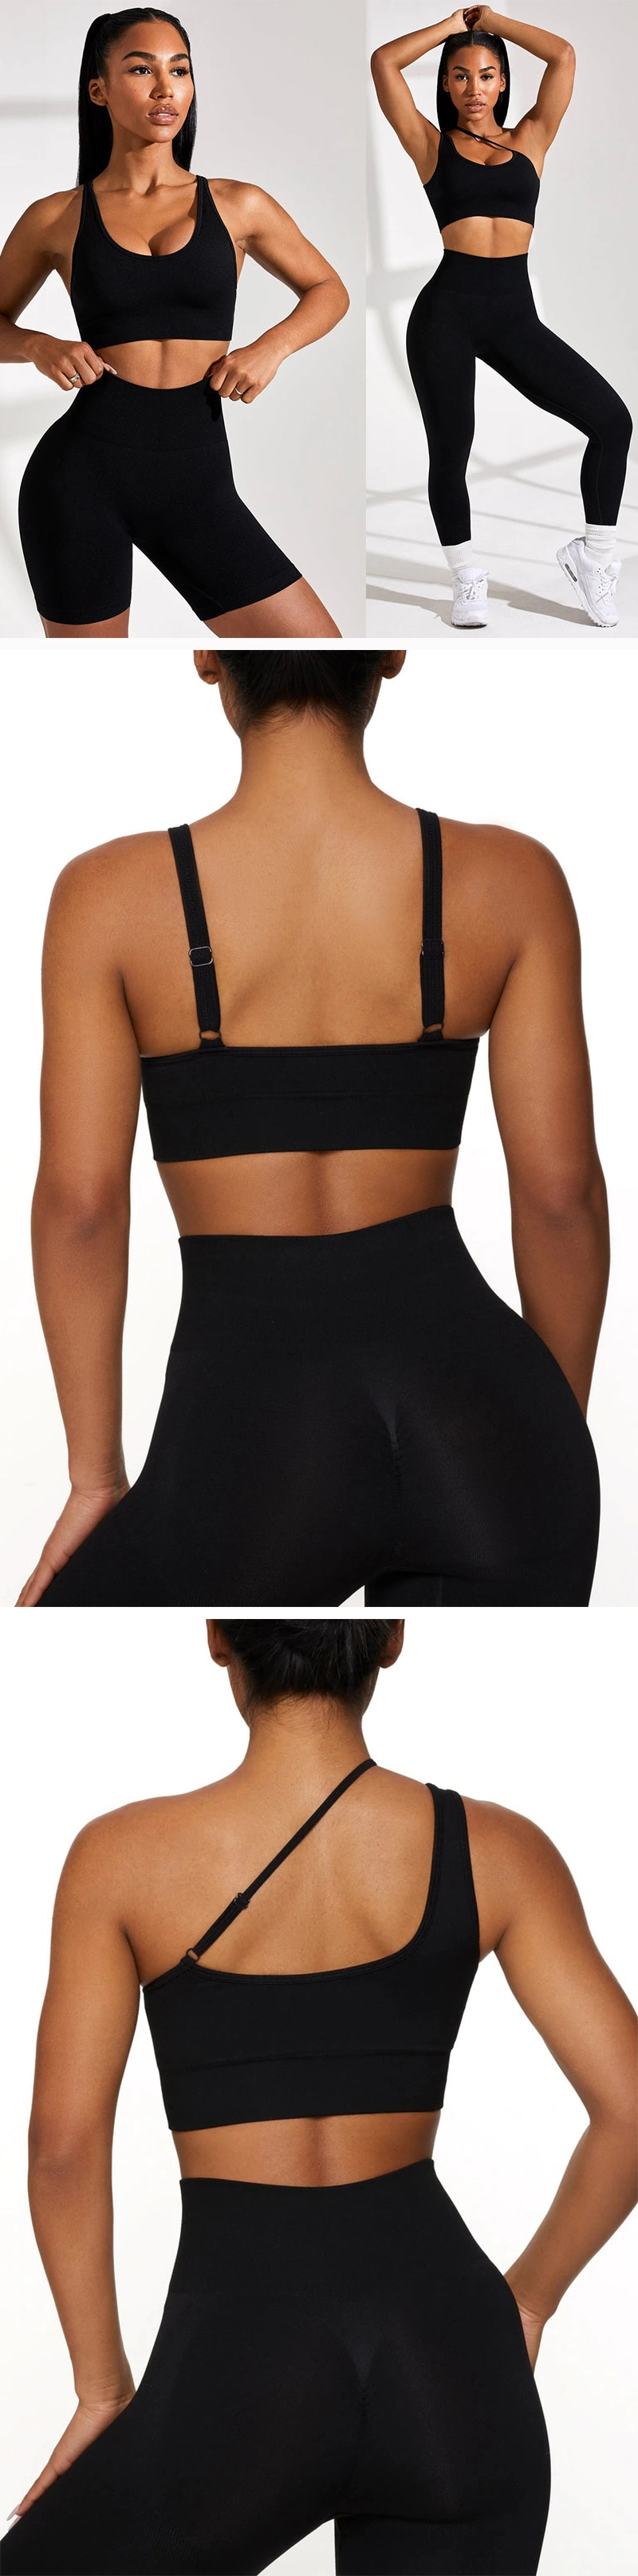 New Design Unique Shoulder Bodybuilding Gym Wear for Women, Private Label Cute Casual Fitness Apparel Seamless Workout Bra + Sports Shorts + Yoga Pants Suits